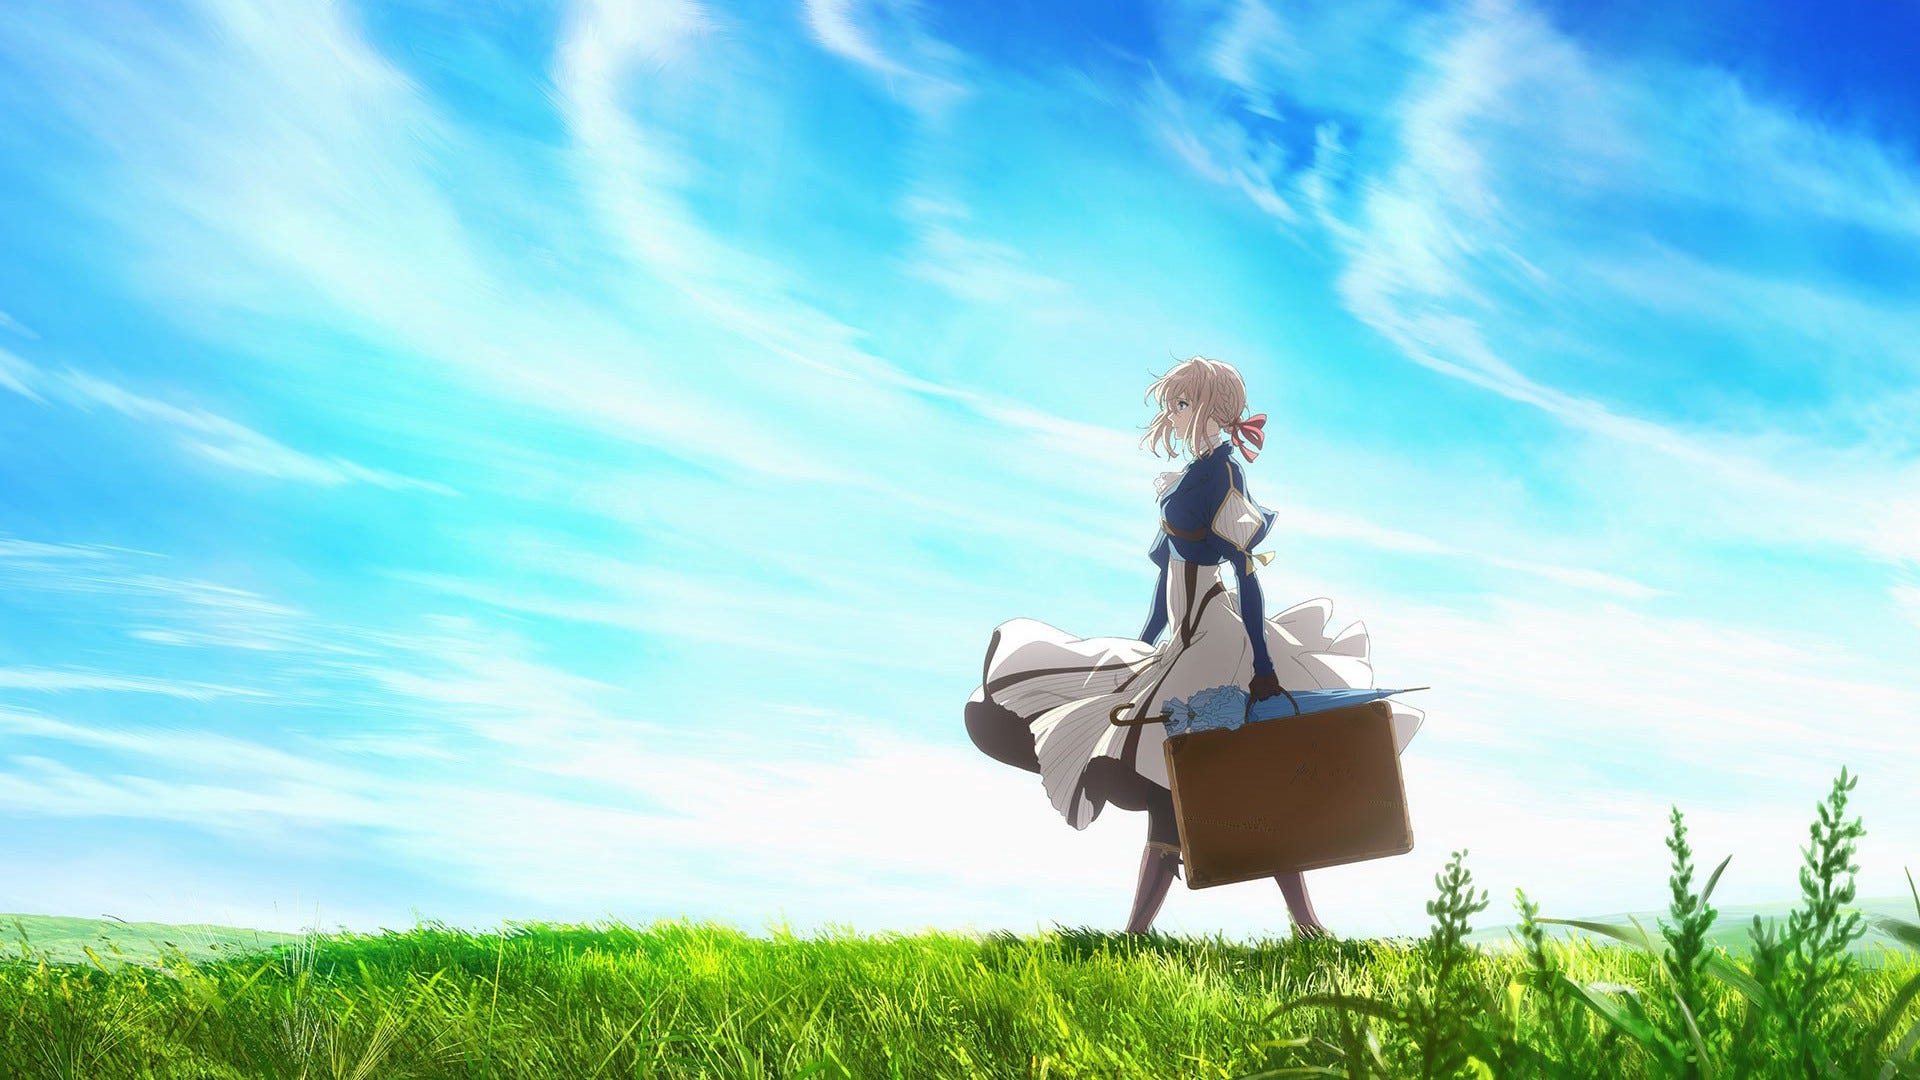 Thoughts on Violet Evergarden